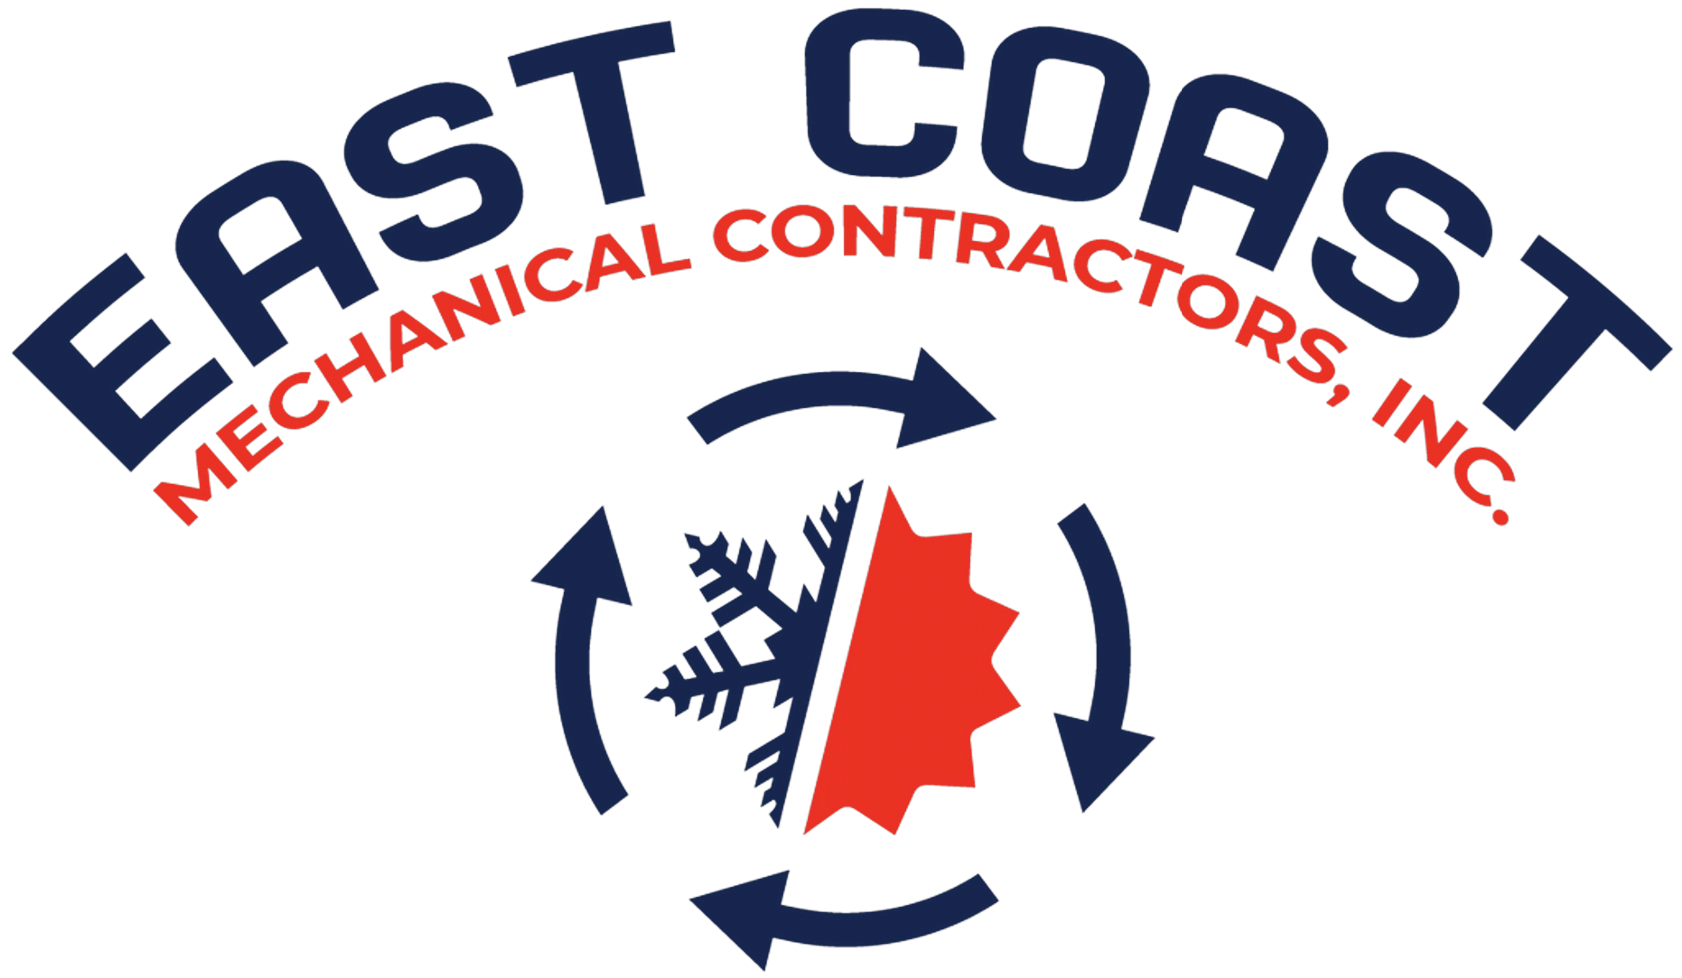 Monmouth County Residential & Commercerial HVAC Specialist | East Coast Mechanical